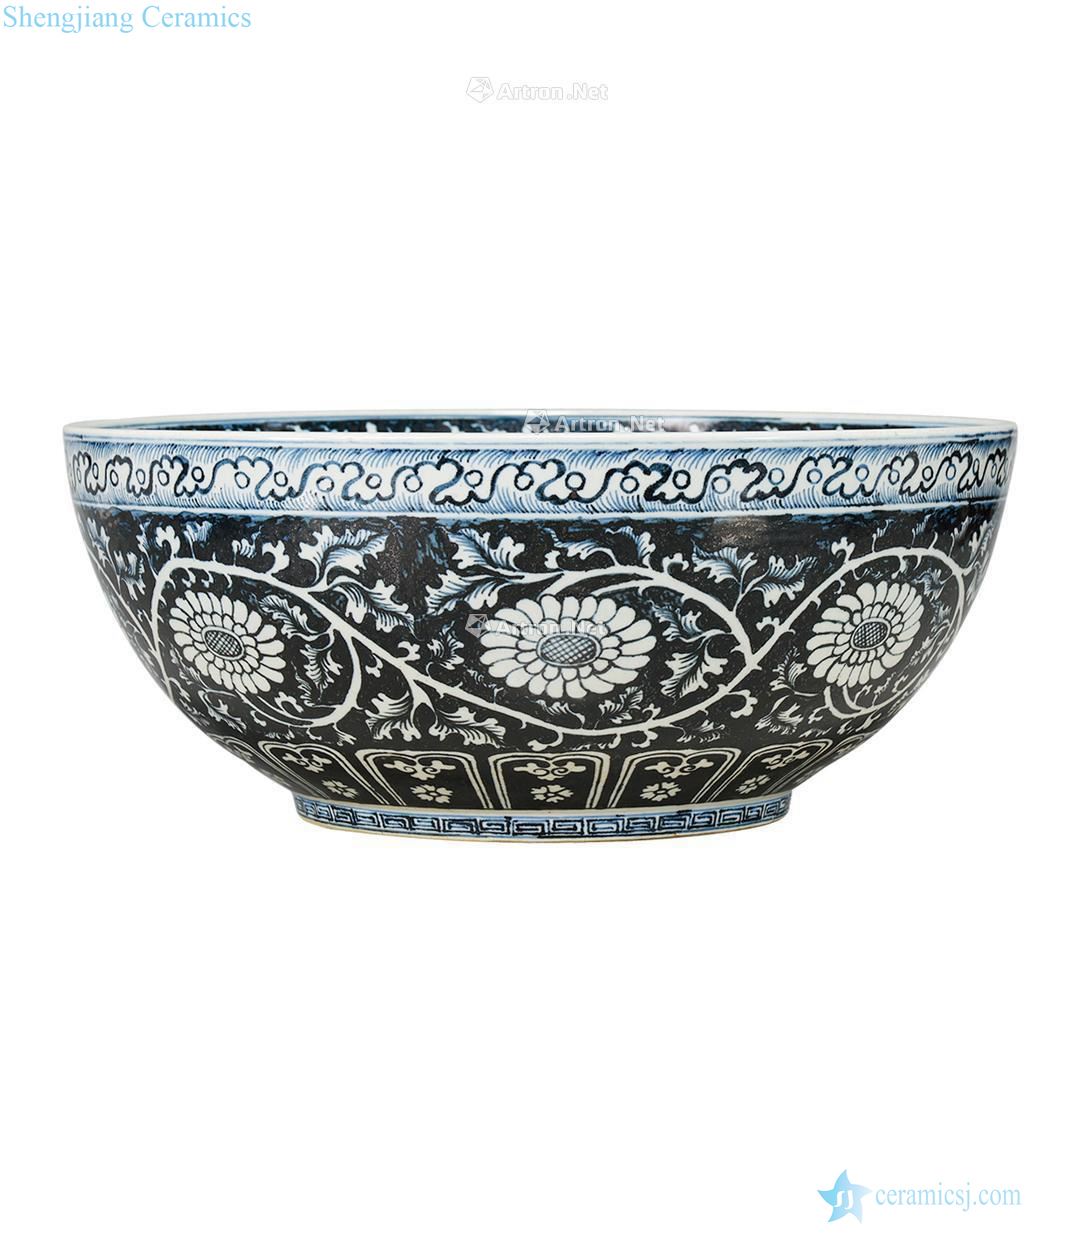 The yuan dynasty Blue and white branch flowers green-splashed bowls